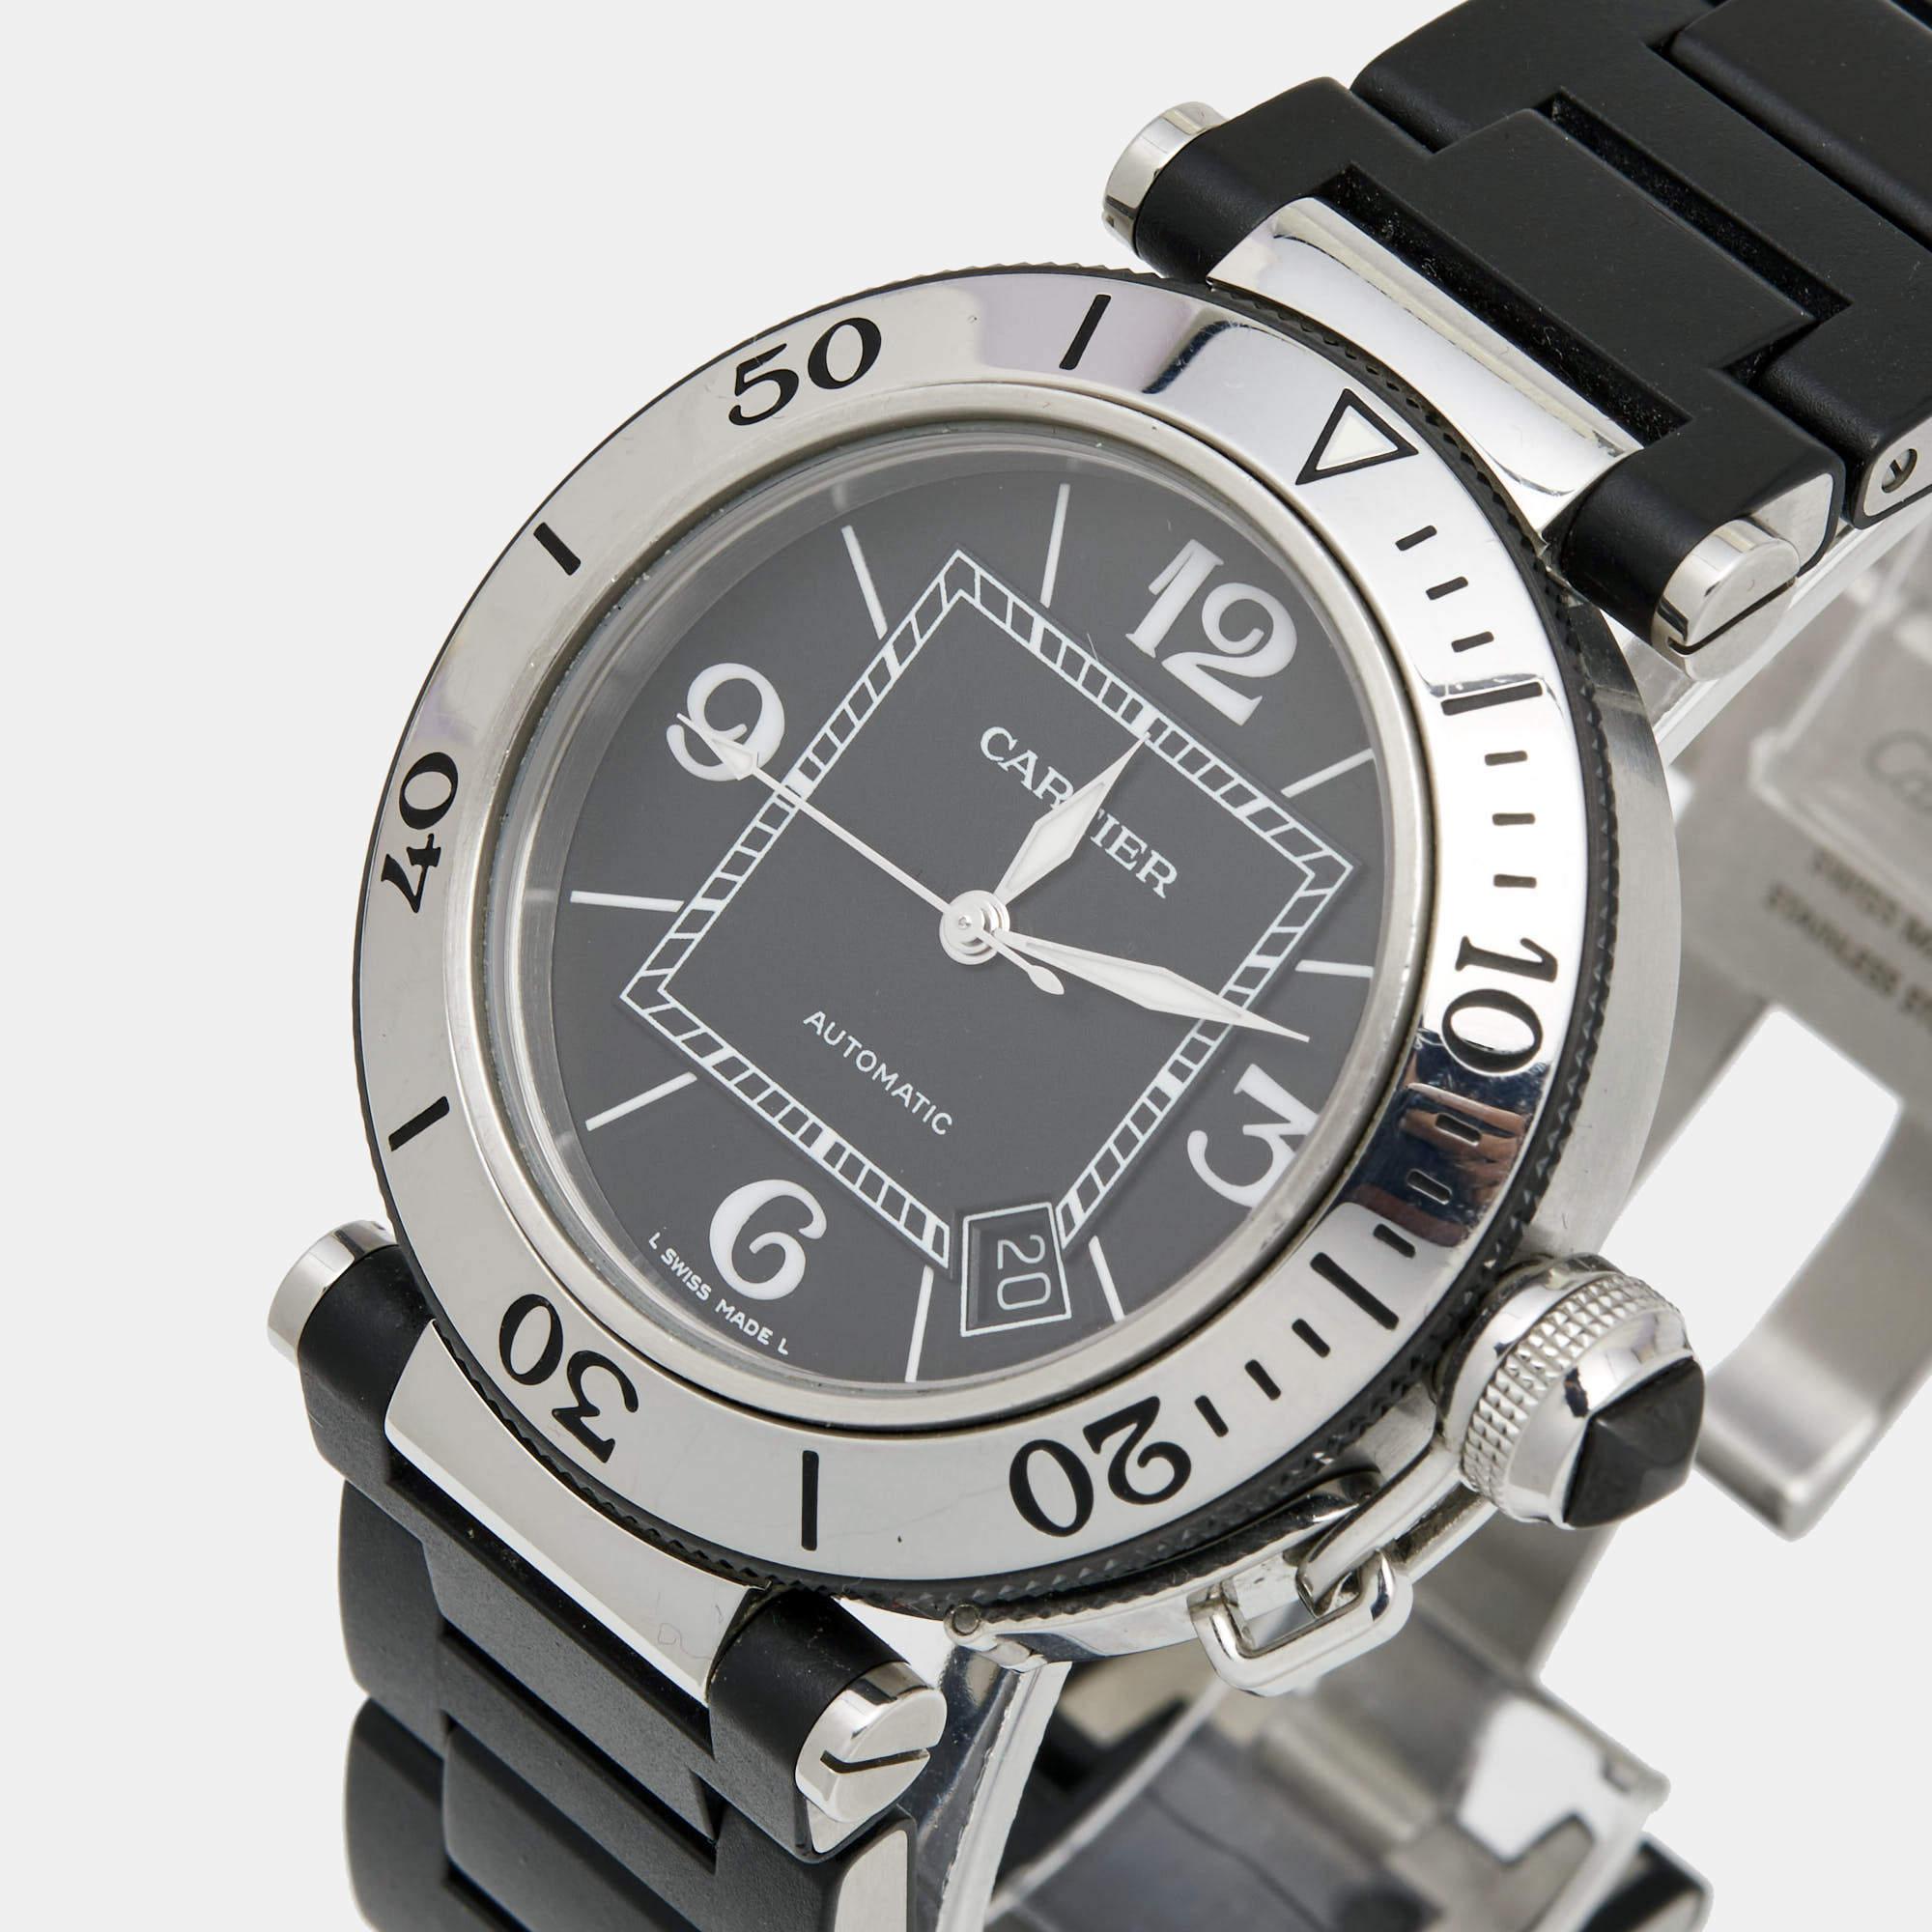 The charm of a finely crafted wristwatch accompanies the wearer through the years and to any occasion they have a date for. It is this charm, infused with timeless luxury, that makes this Cartier wristwatch such an incredible pick.

